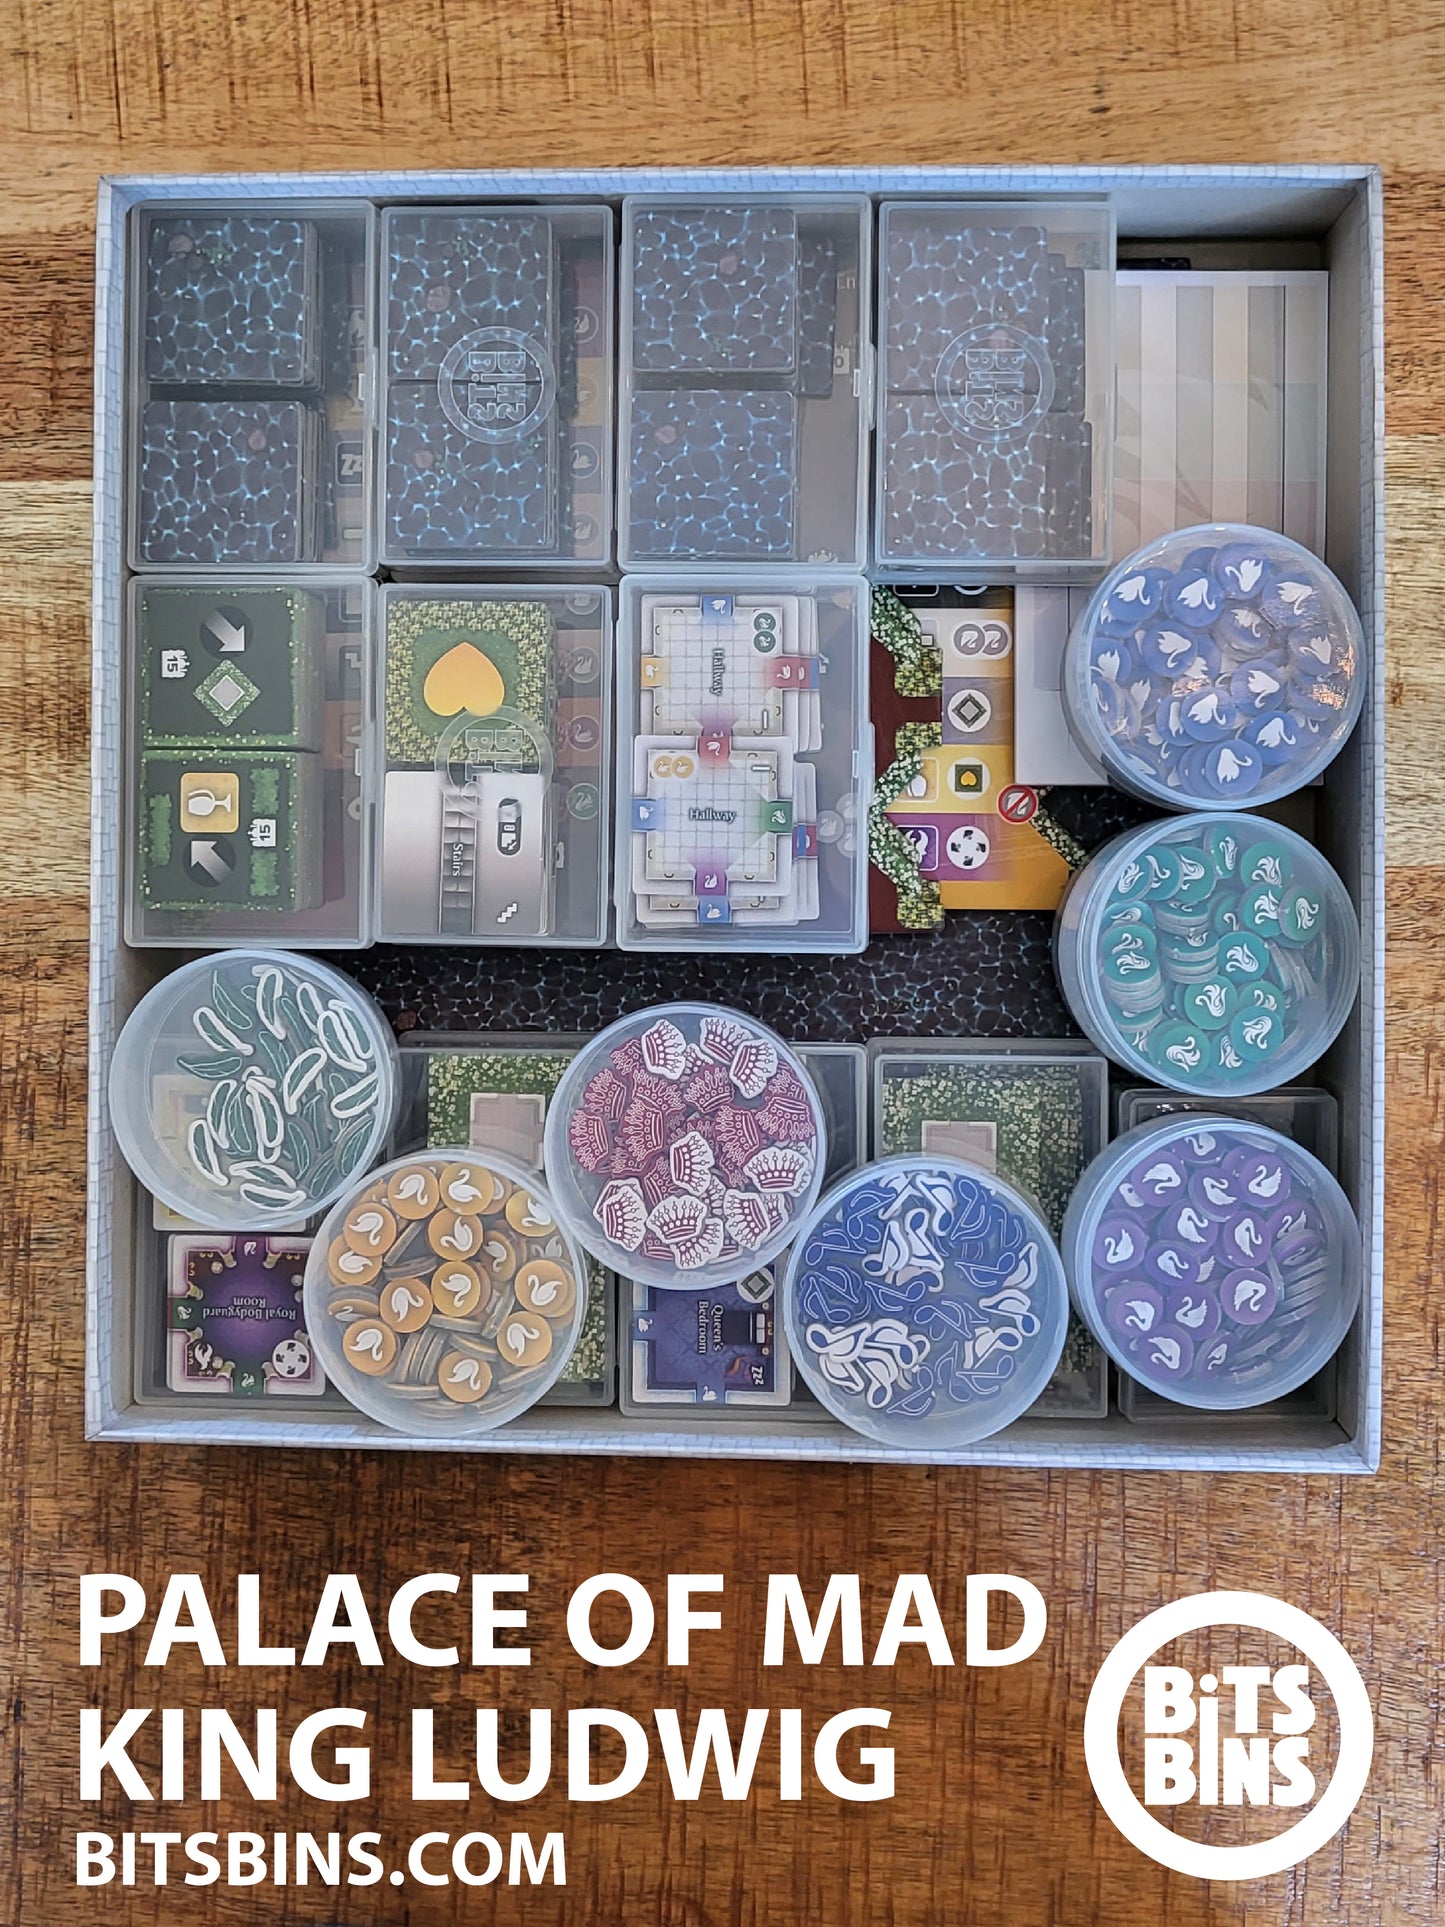 RECOMMENDED Bitsbins The Palace of mad King Ludwig - 9 Pods, 1 Original, 11 XLs